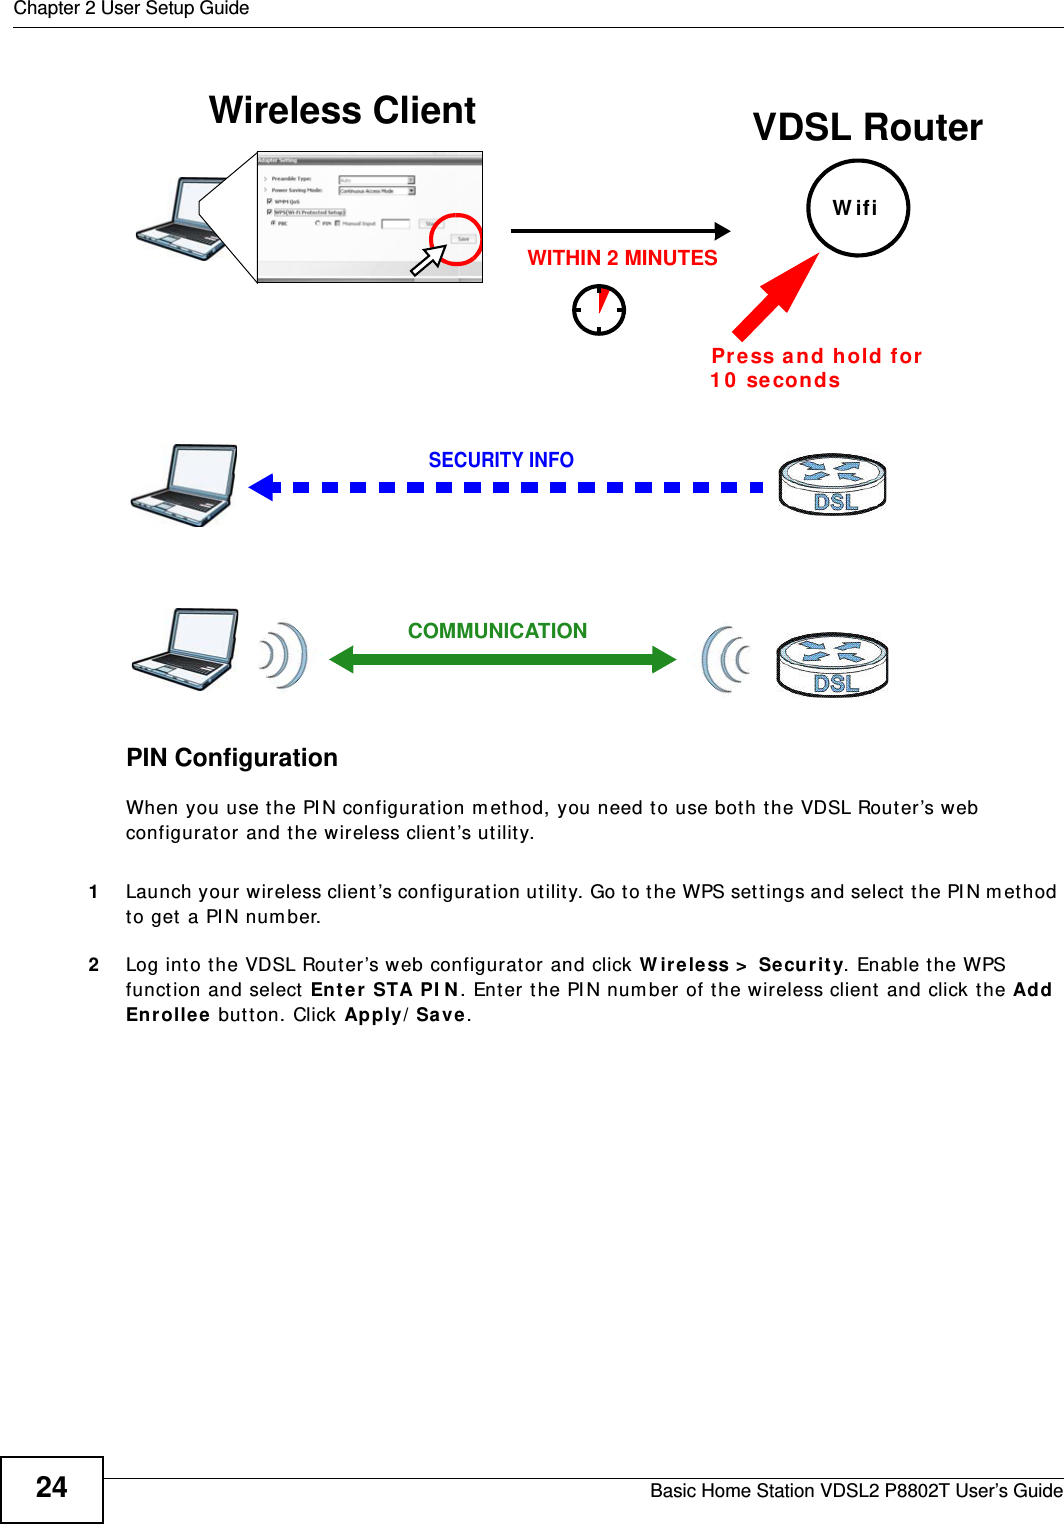 Chapter 2 User Setup GuideBasic Home Station VDSL2 P8802T User’s Guide24Example WPS Process: PBC MethodPIN ConfigurationWhen you use t he PI N configurat ion m ethod, you need t o use both t he VDSL Rout er’s web configurat or and the wireless client ’s utilit y.1Launch your wireless client’s configurat ion utility. Go to t he WPS set t ings and select  t he PI N m et hod to get a PI N num ber.   2Log int o the VDSL Router’s web configurat or and click W ire less &gt;  Se cur ity. Enable t he WPS funct ion and select  En ter  STA PI N. Ent er the PI N num ber of the w ireless client  and click the Add Enrollee  butt on. Click Apply / Sa ve .  Wireless Client VDSL RouterSECURITY INFOCOMMUNICATIONWITHIN 2 MINUTESPress an d hold for   1 0  se condsW ifi